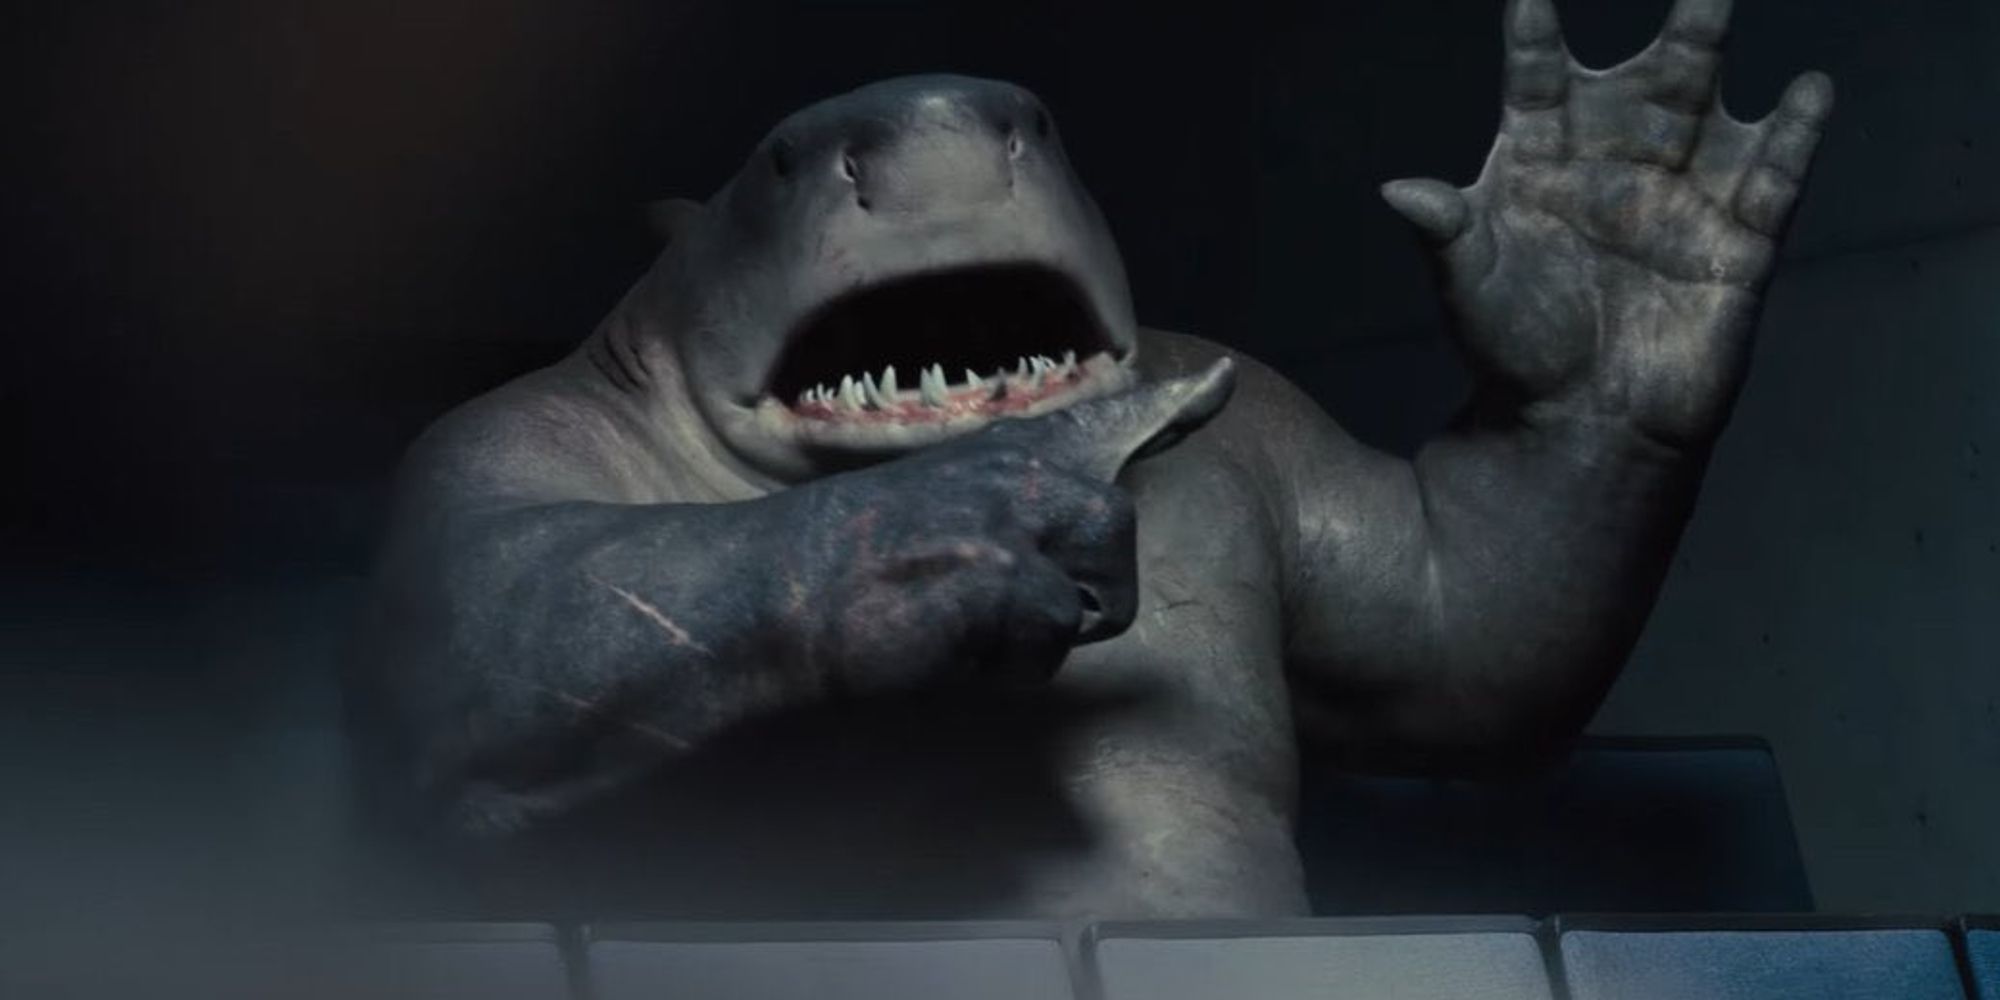 Nanaue AKA King Shark point out his hand in James Gunn's The Suicide Squad (2021)